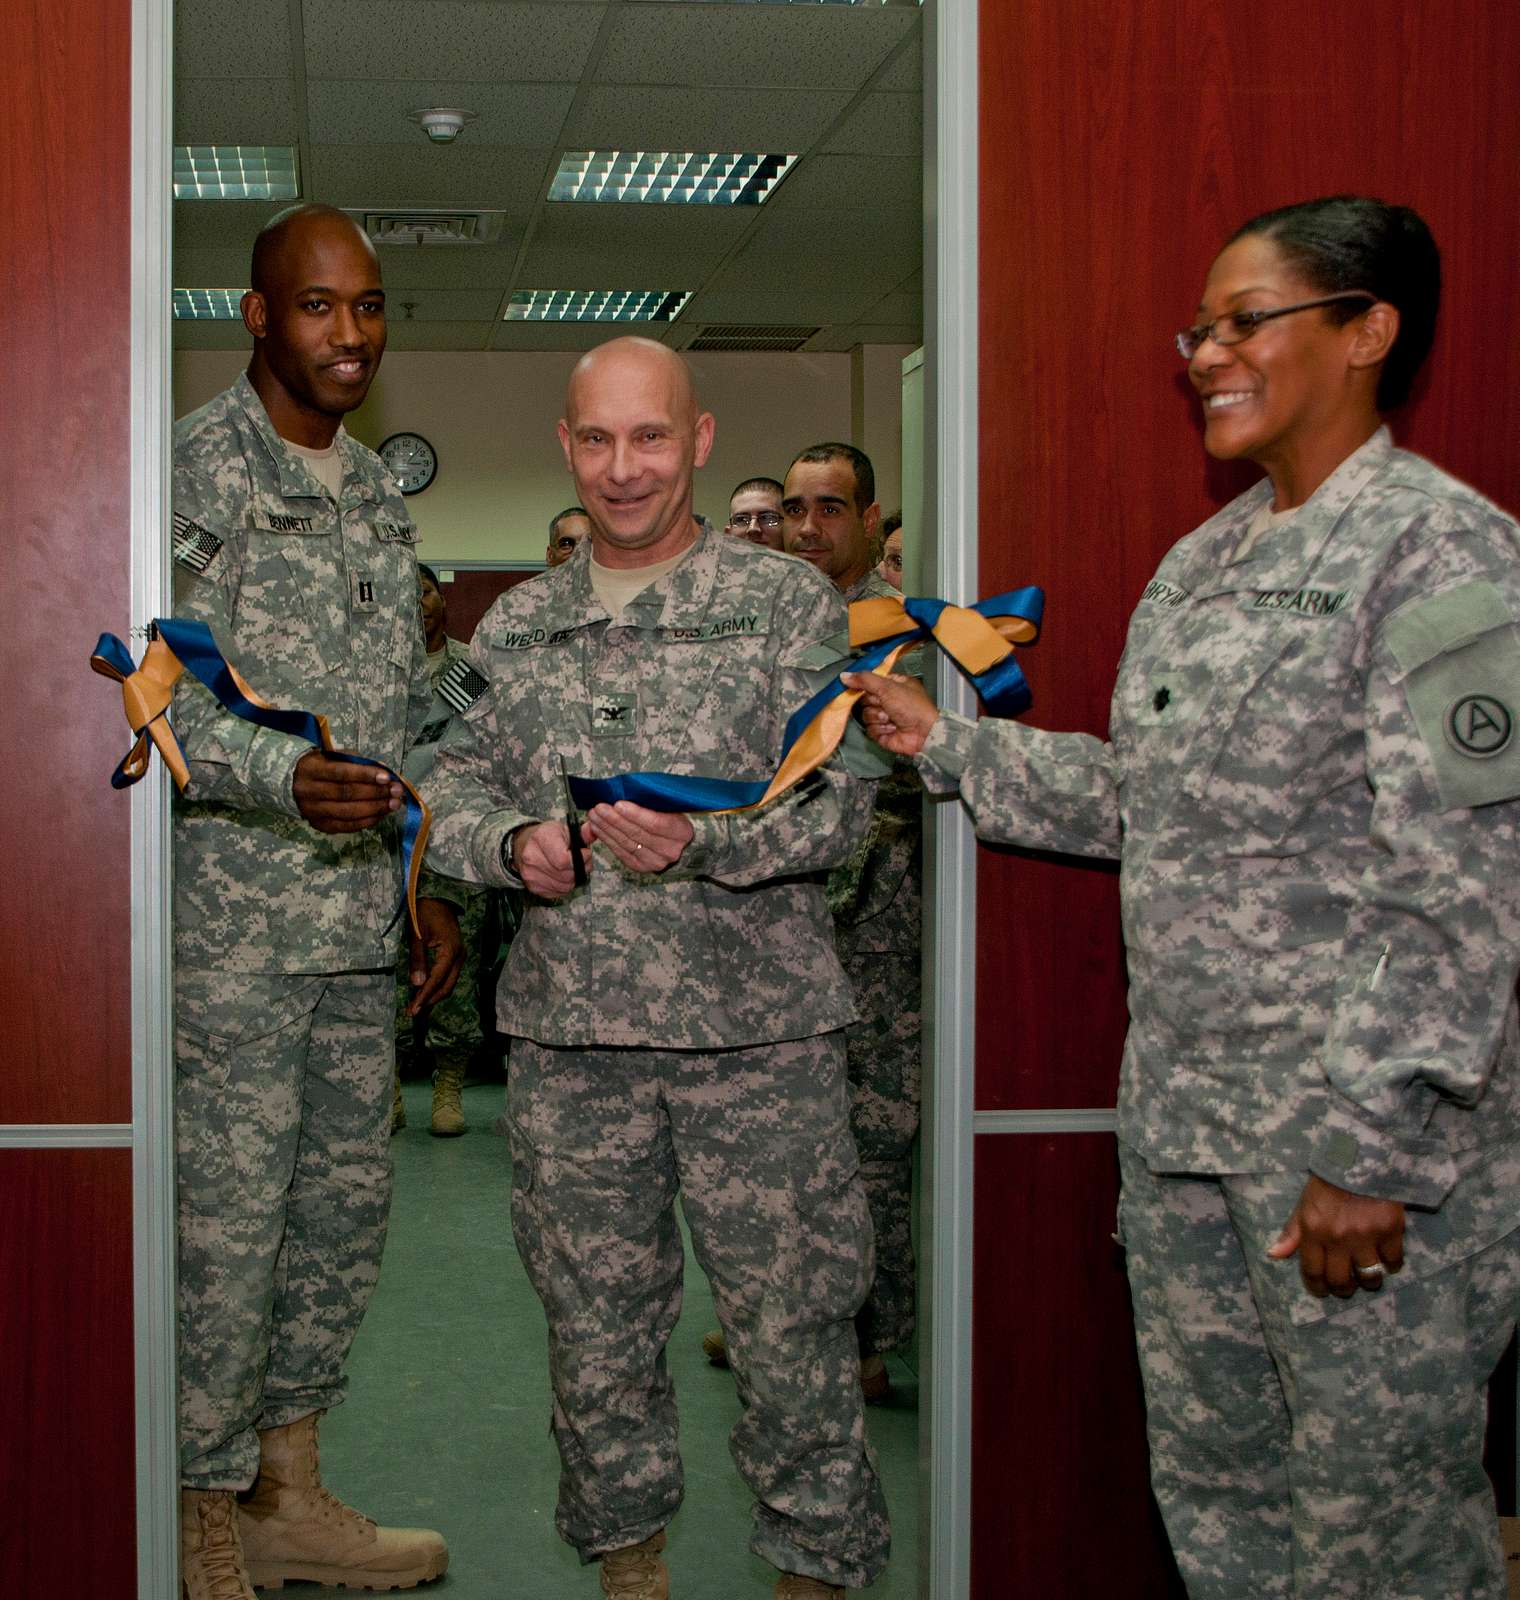 Col. Thomas Brittain, left, cuts the ribbon with a sword with help from  Command Sgt. Major Matthew Barnes, center, and Specialist Stafford Smith  during the Ribbon Cutting Ceremony at the remodel Lewis